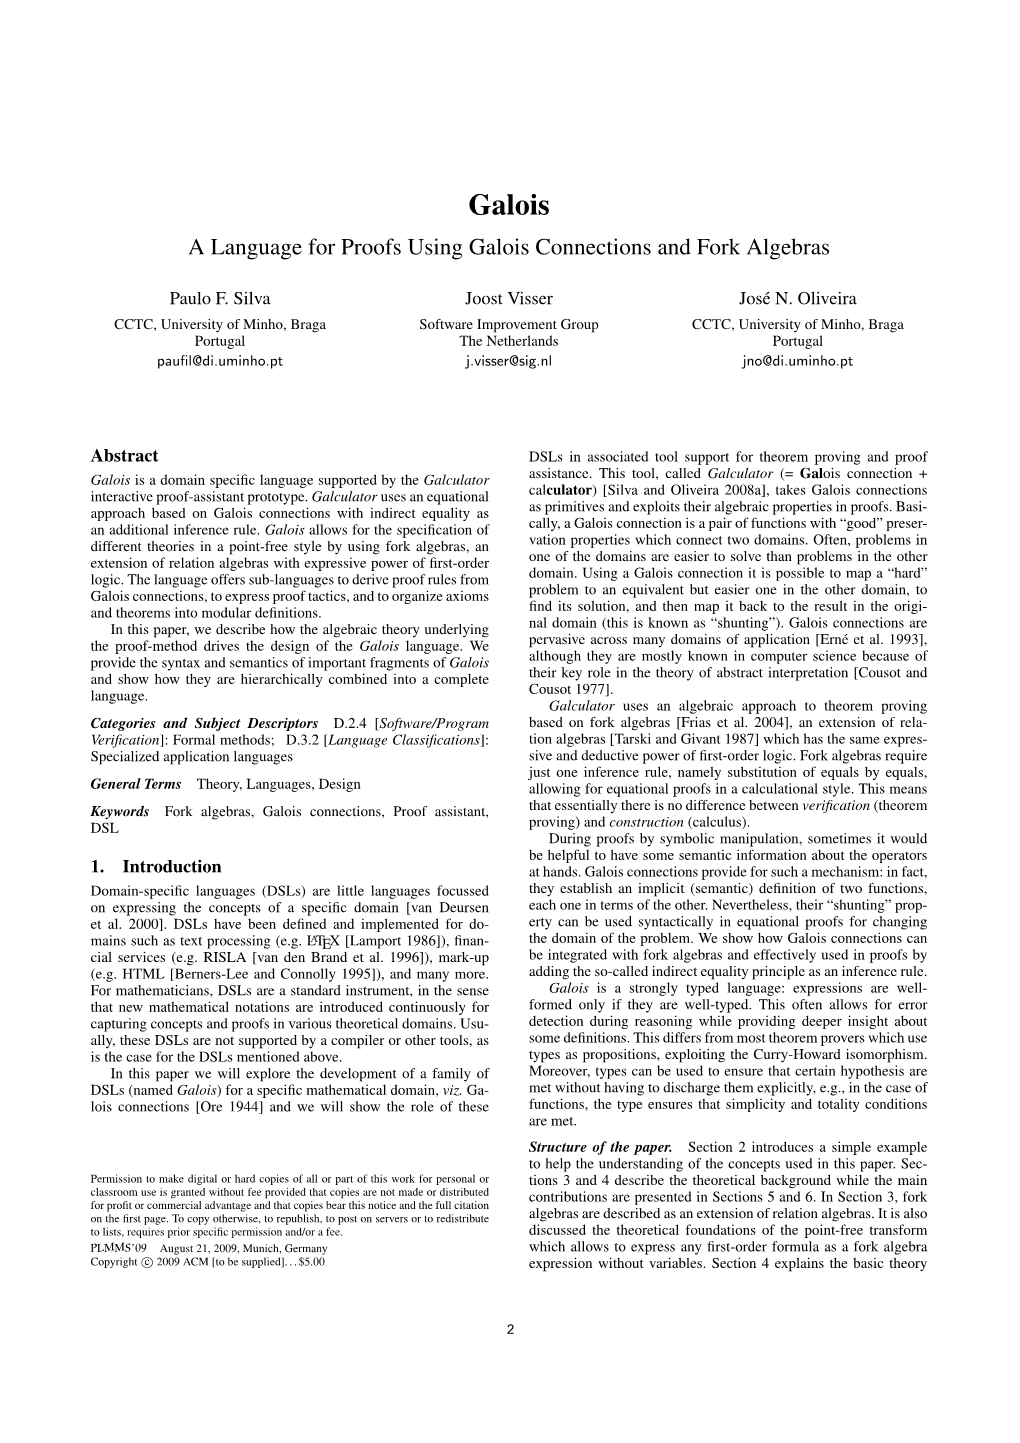 Galois a Language for Proofs Using Galois Connections and Fork Algebras